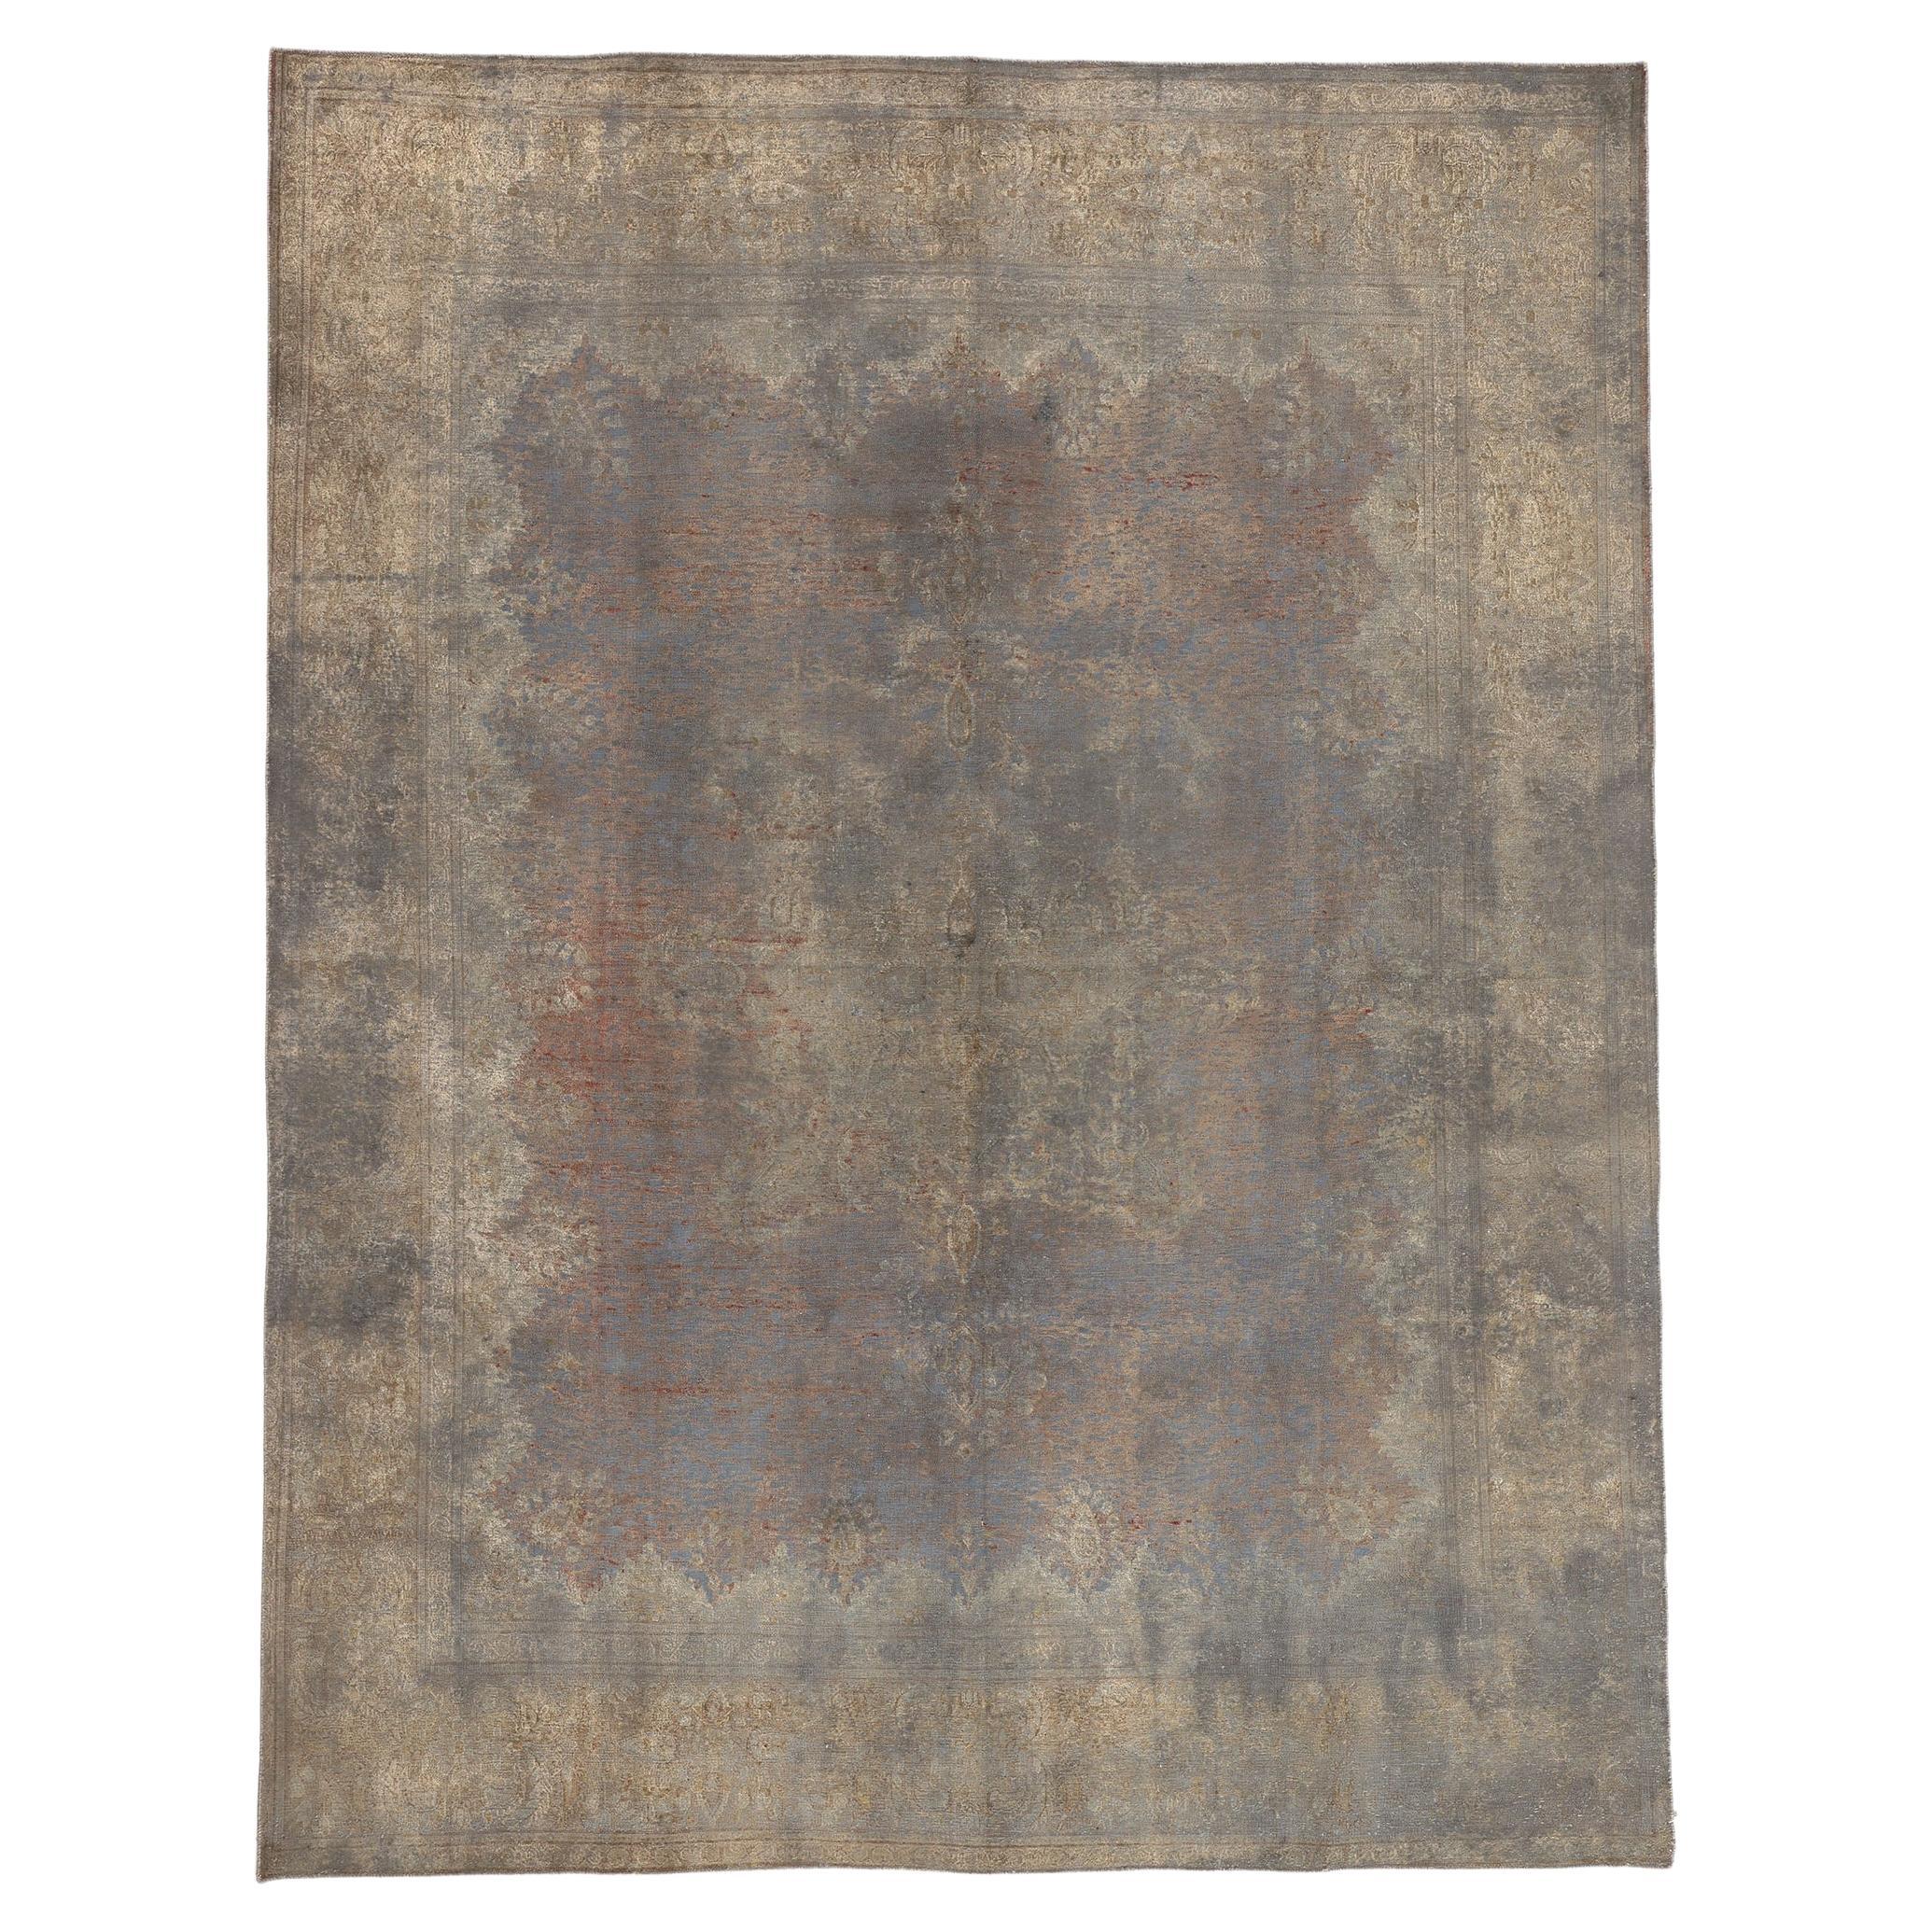 Vintage Turkish Overdyed Rug, Luxe Utilitarian Appeal Meets Belgian Chic